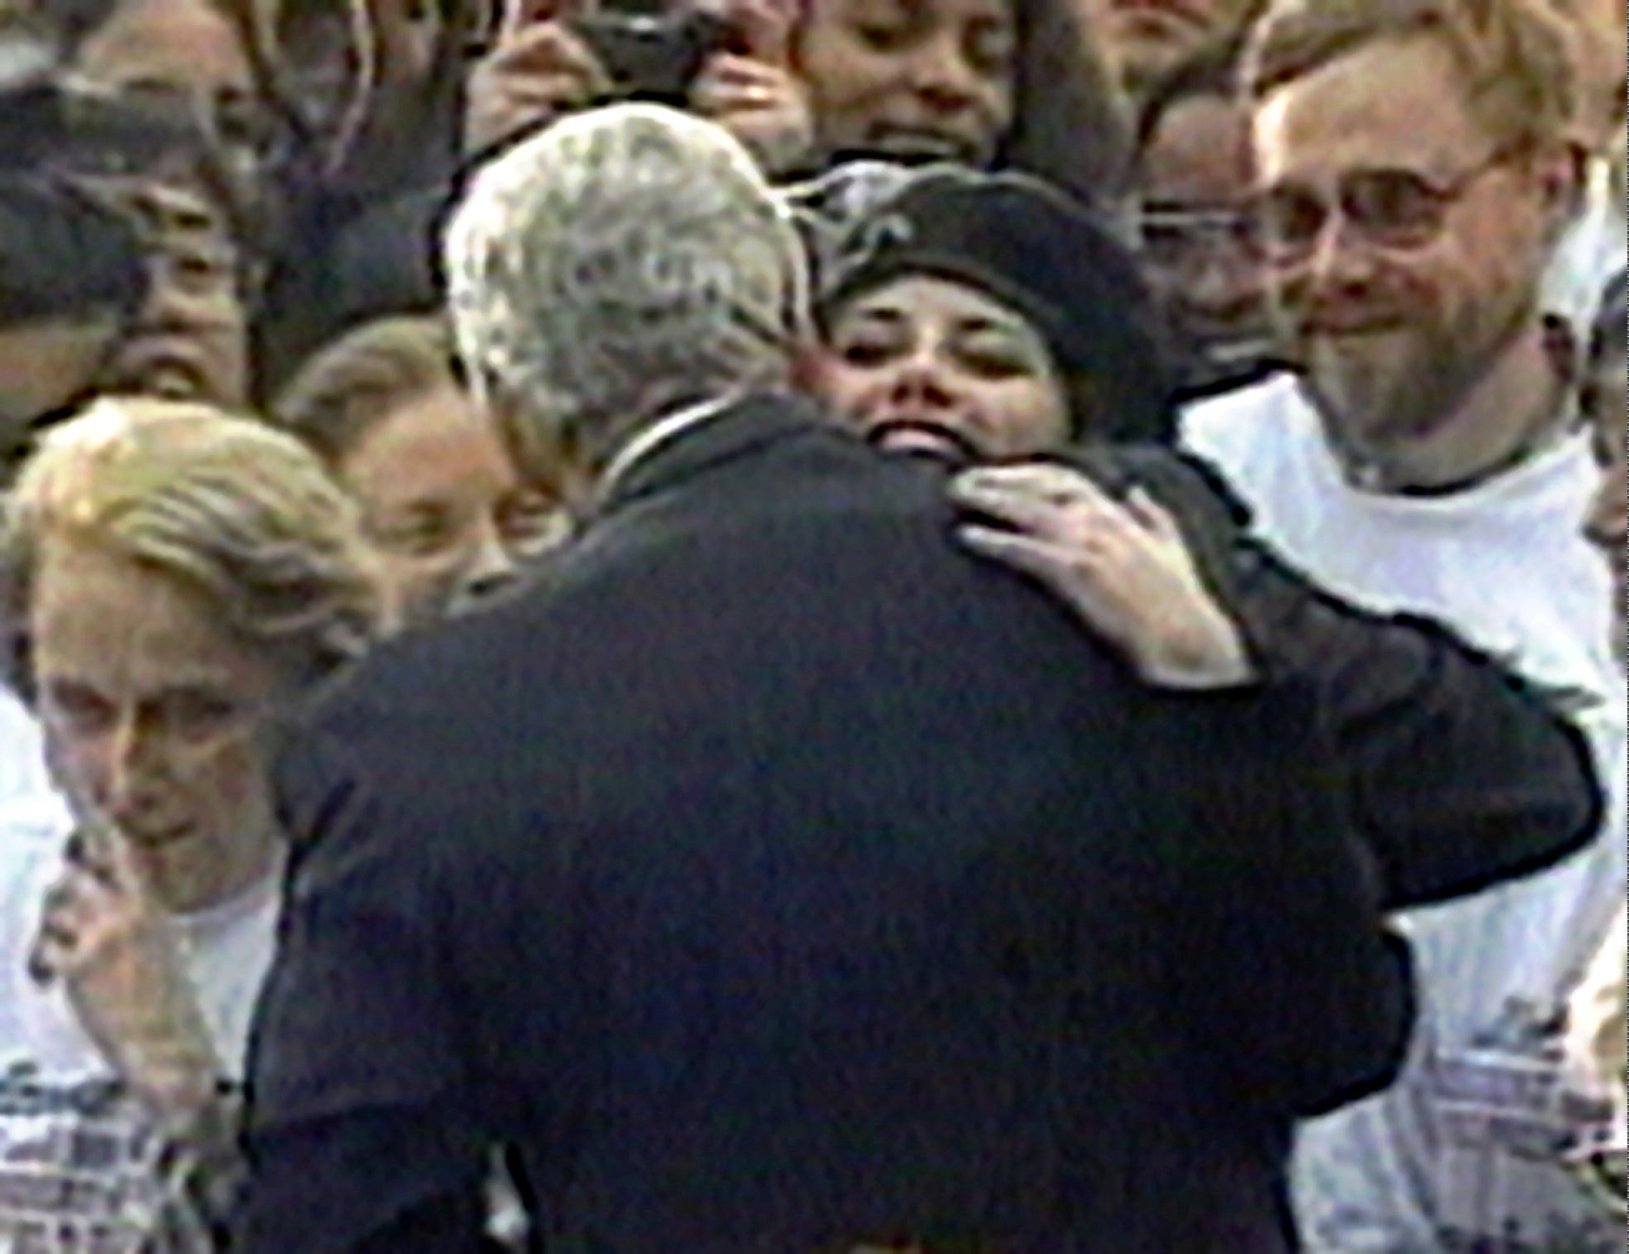 FILE - In this Nov. 6, 1996 file image taken from video, Monica Lewinsky embraces President Clinton as he greeted well-wishers at a White House lawn party in Washington Nov. 6, 1996. The long-running drama of Hillary Clinton's marriage _ her husband's infidelity and how she dealt with it _ is back as a subtext in this year's presidential race.   (AP Photo/APTV)